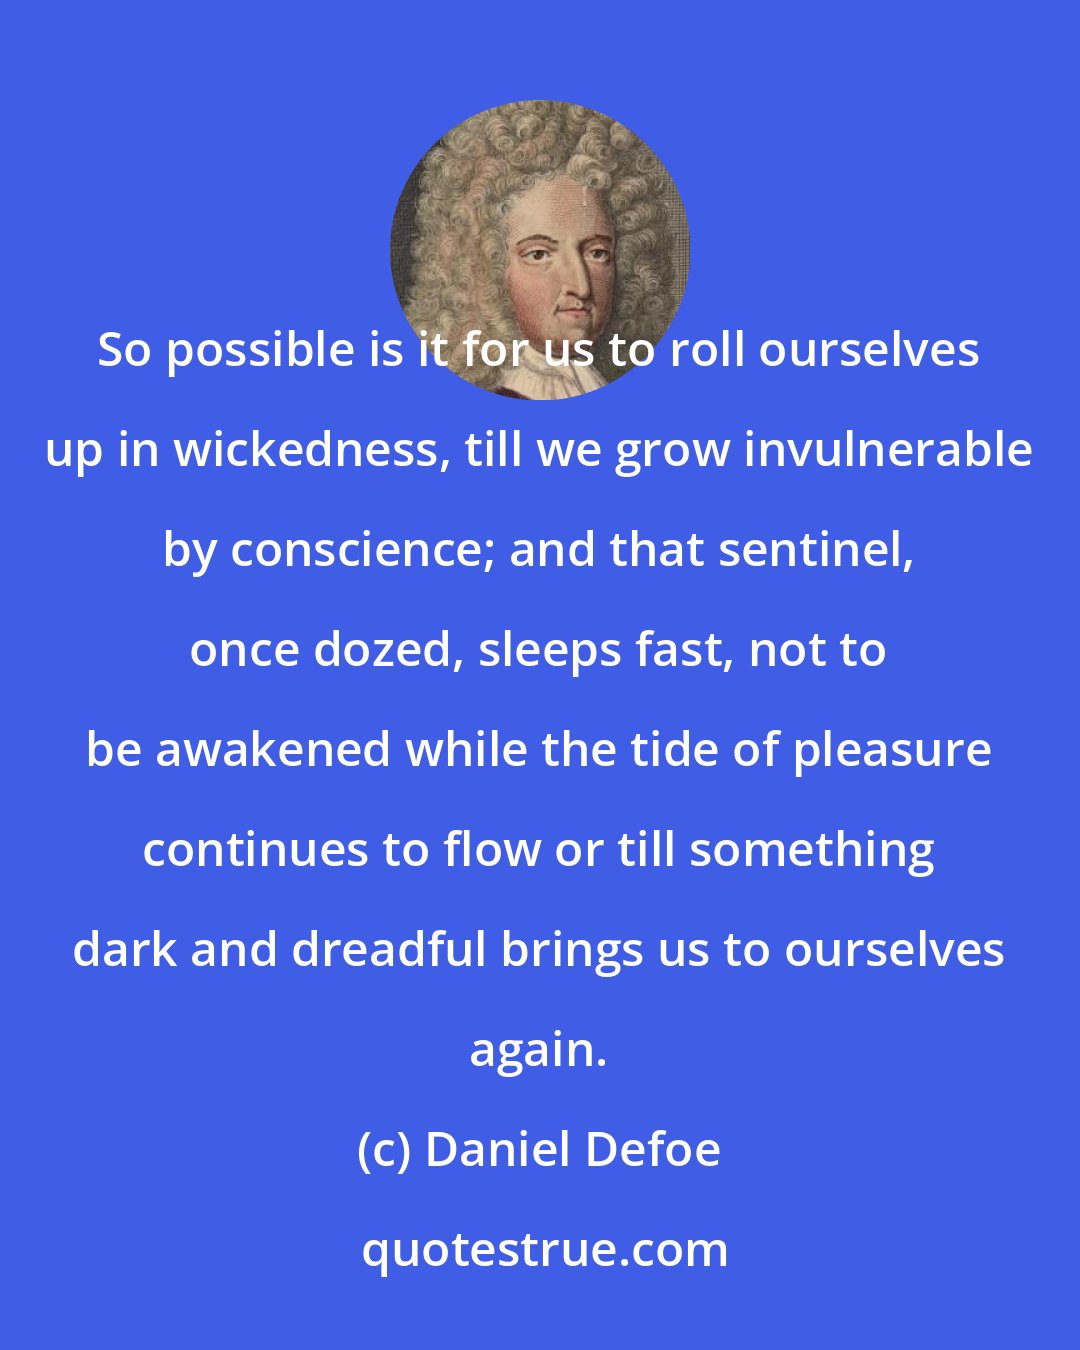 Daniel Defoe: So possible is it for us to roll ourselves up in wickedness, till we grow invulnerable by conscience; and that sentinel, once dozed, sleeps fast, not to be awakened while the tide of pleasure continues to flow or till something dark and dreadful brings us to ourselves again.